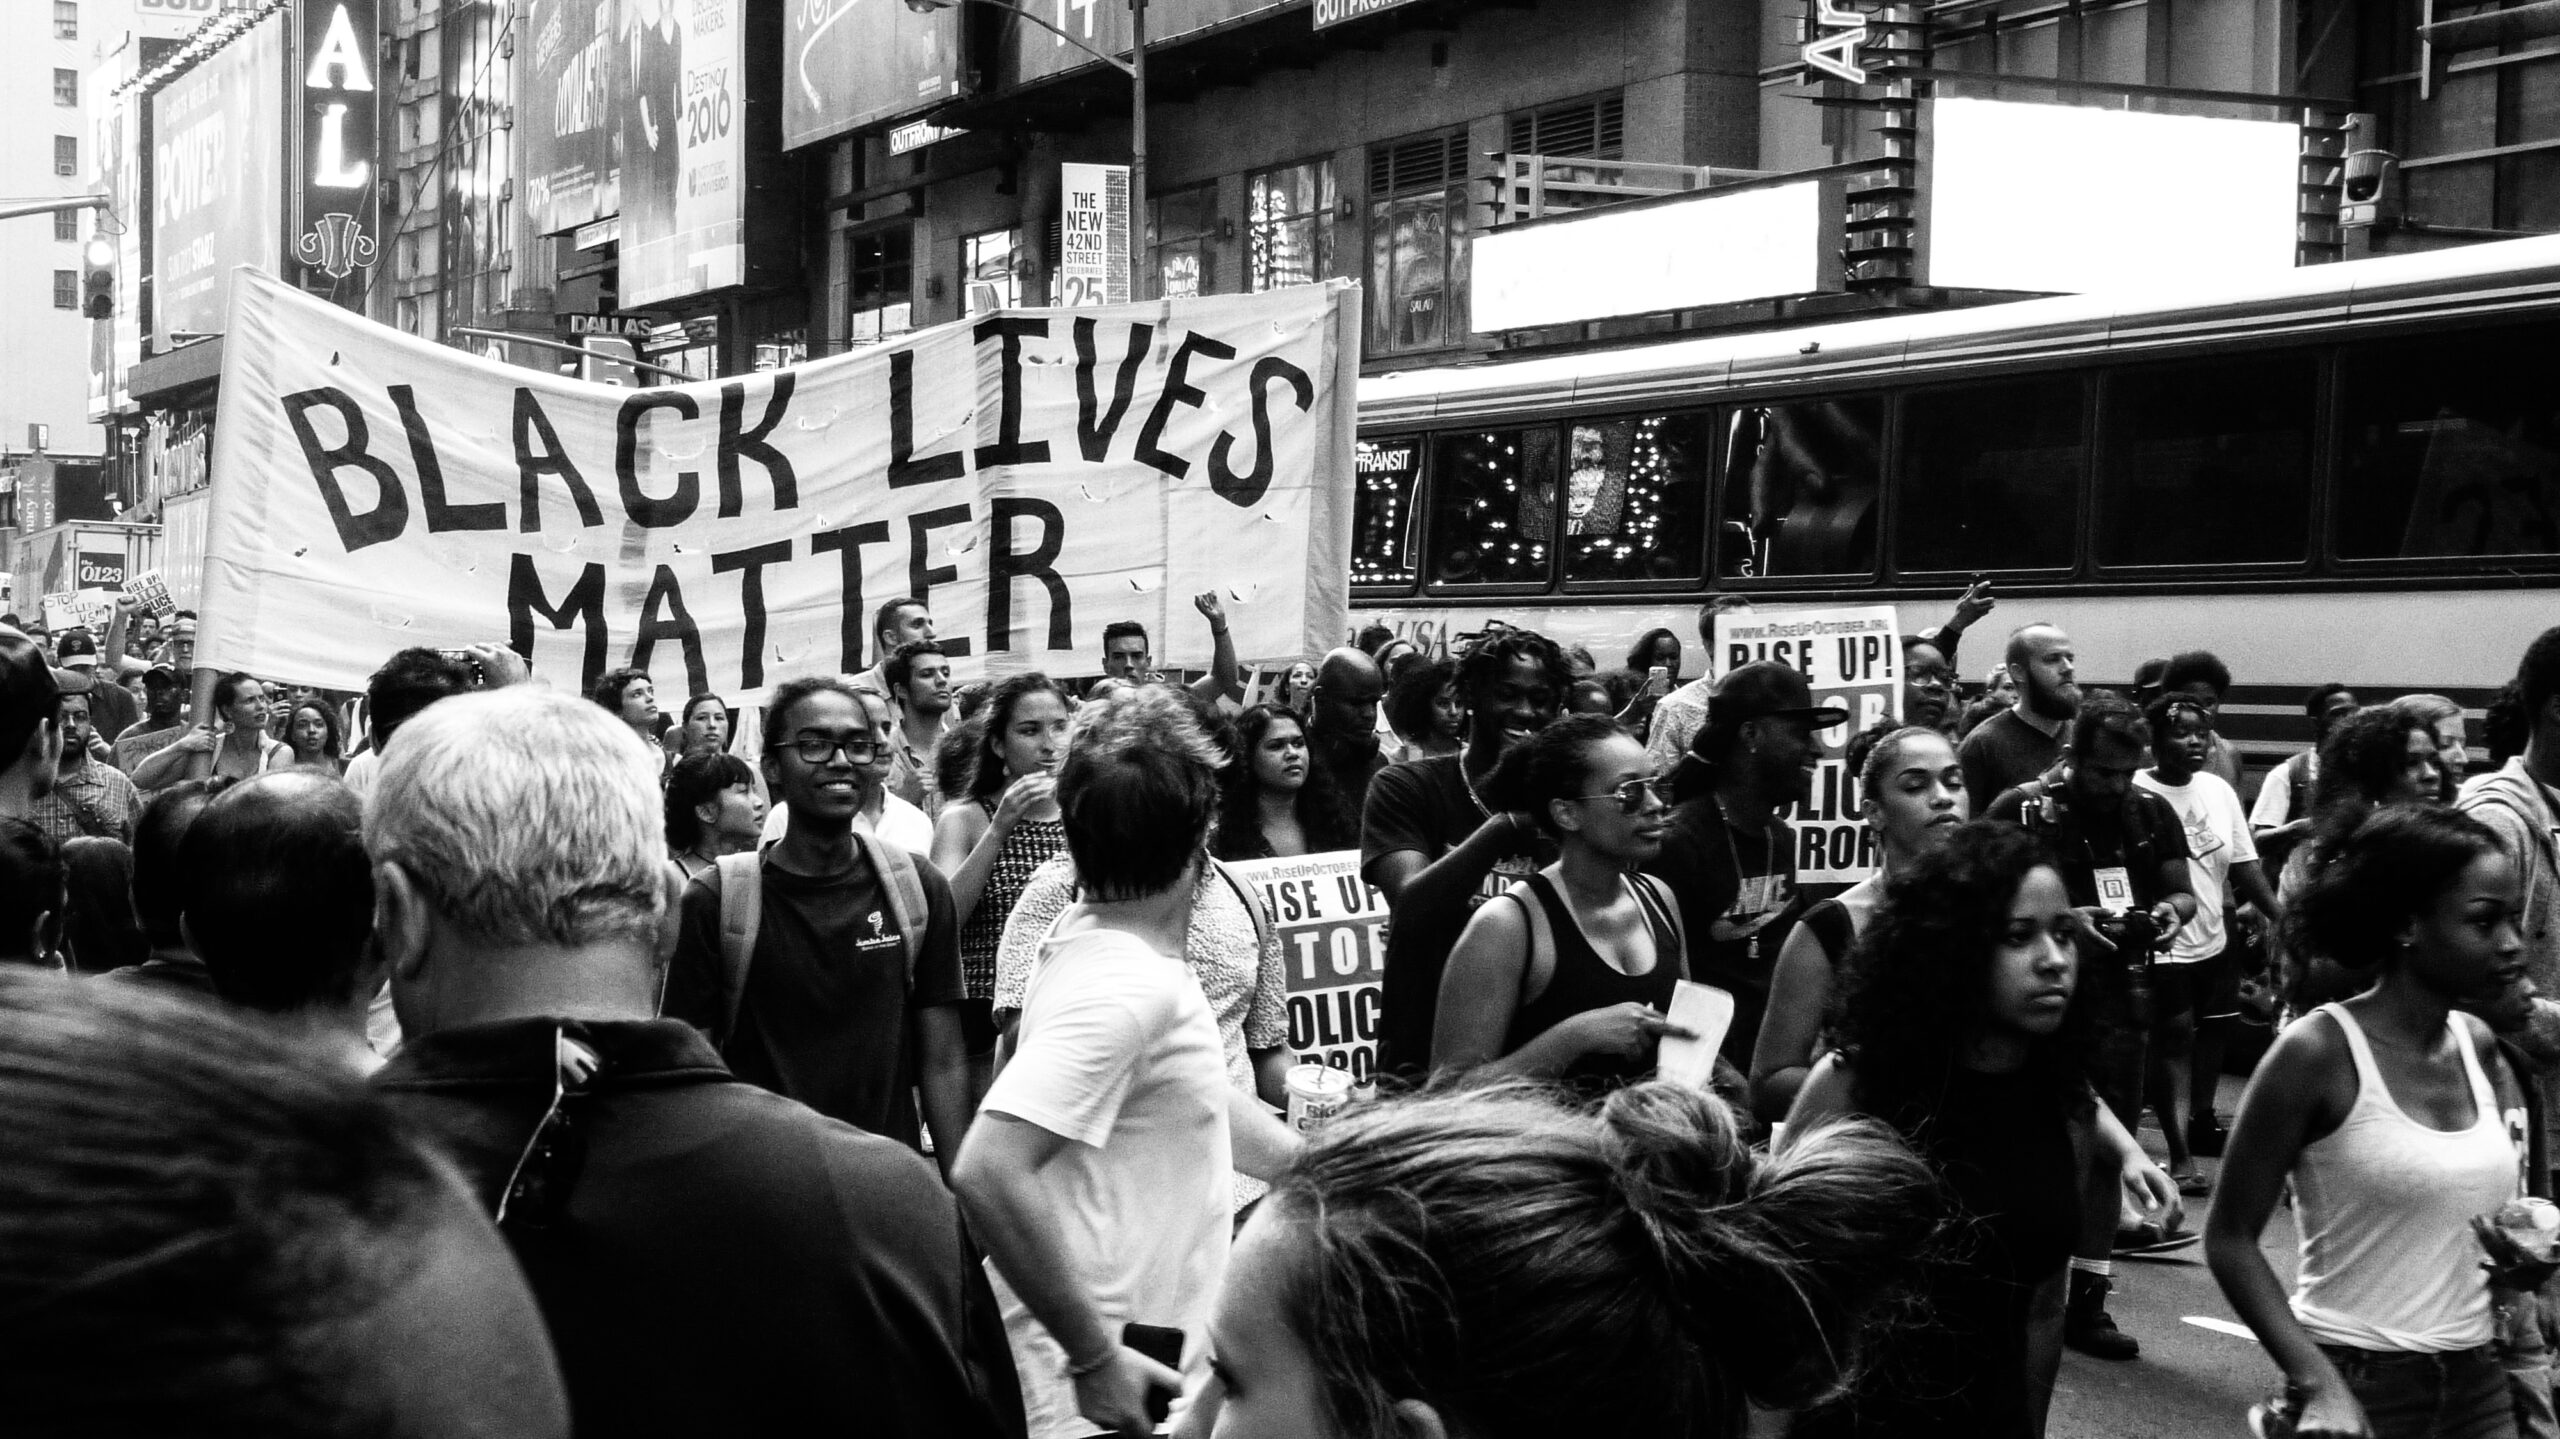 people march in the streets carrying a Black Lives Matter banner